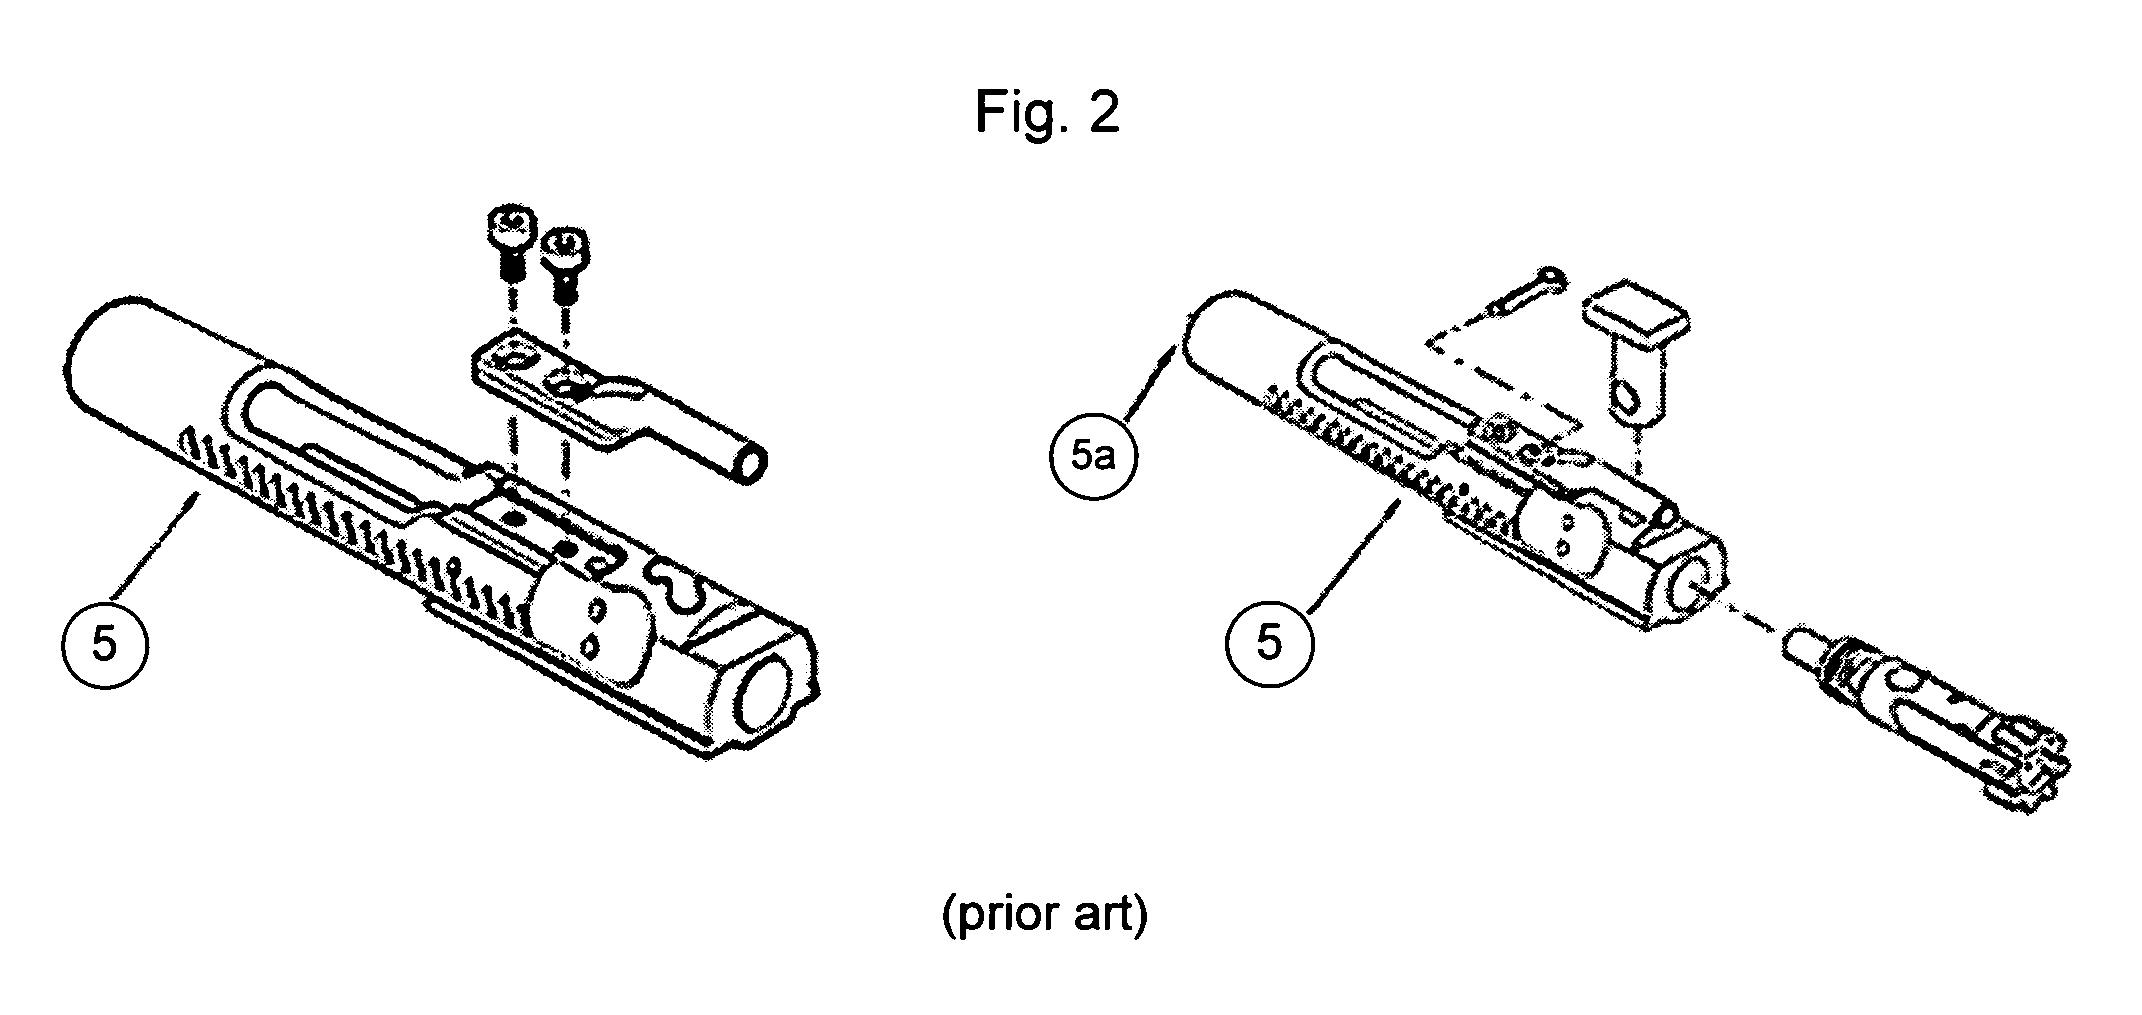 Back-up electric power generator for electronic components attached to automatic firearms